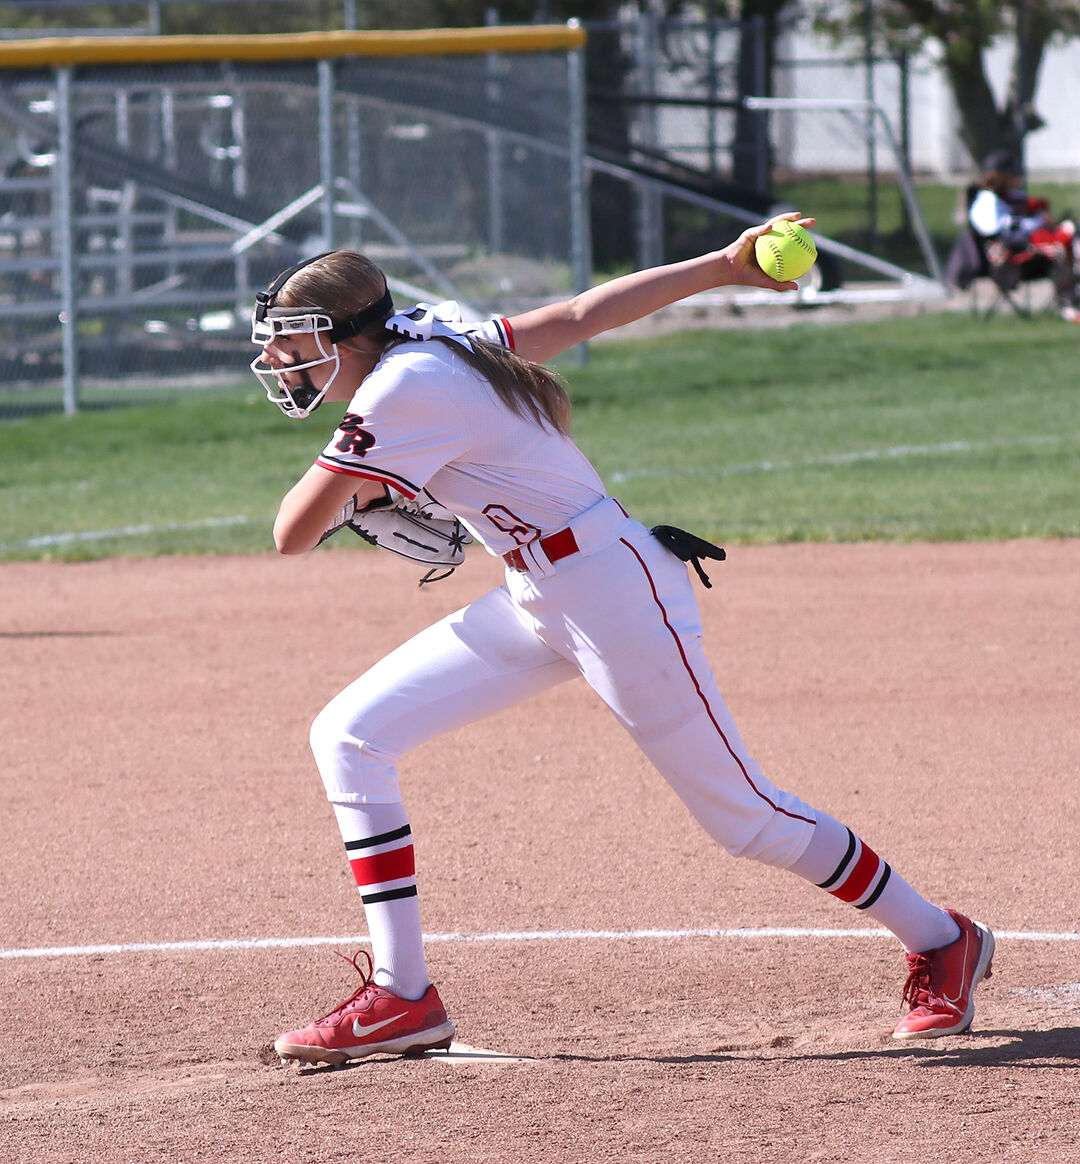 Softball earns bye, setting up playoff series with Tooele